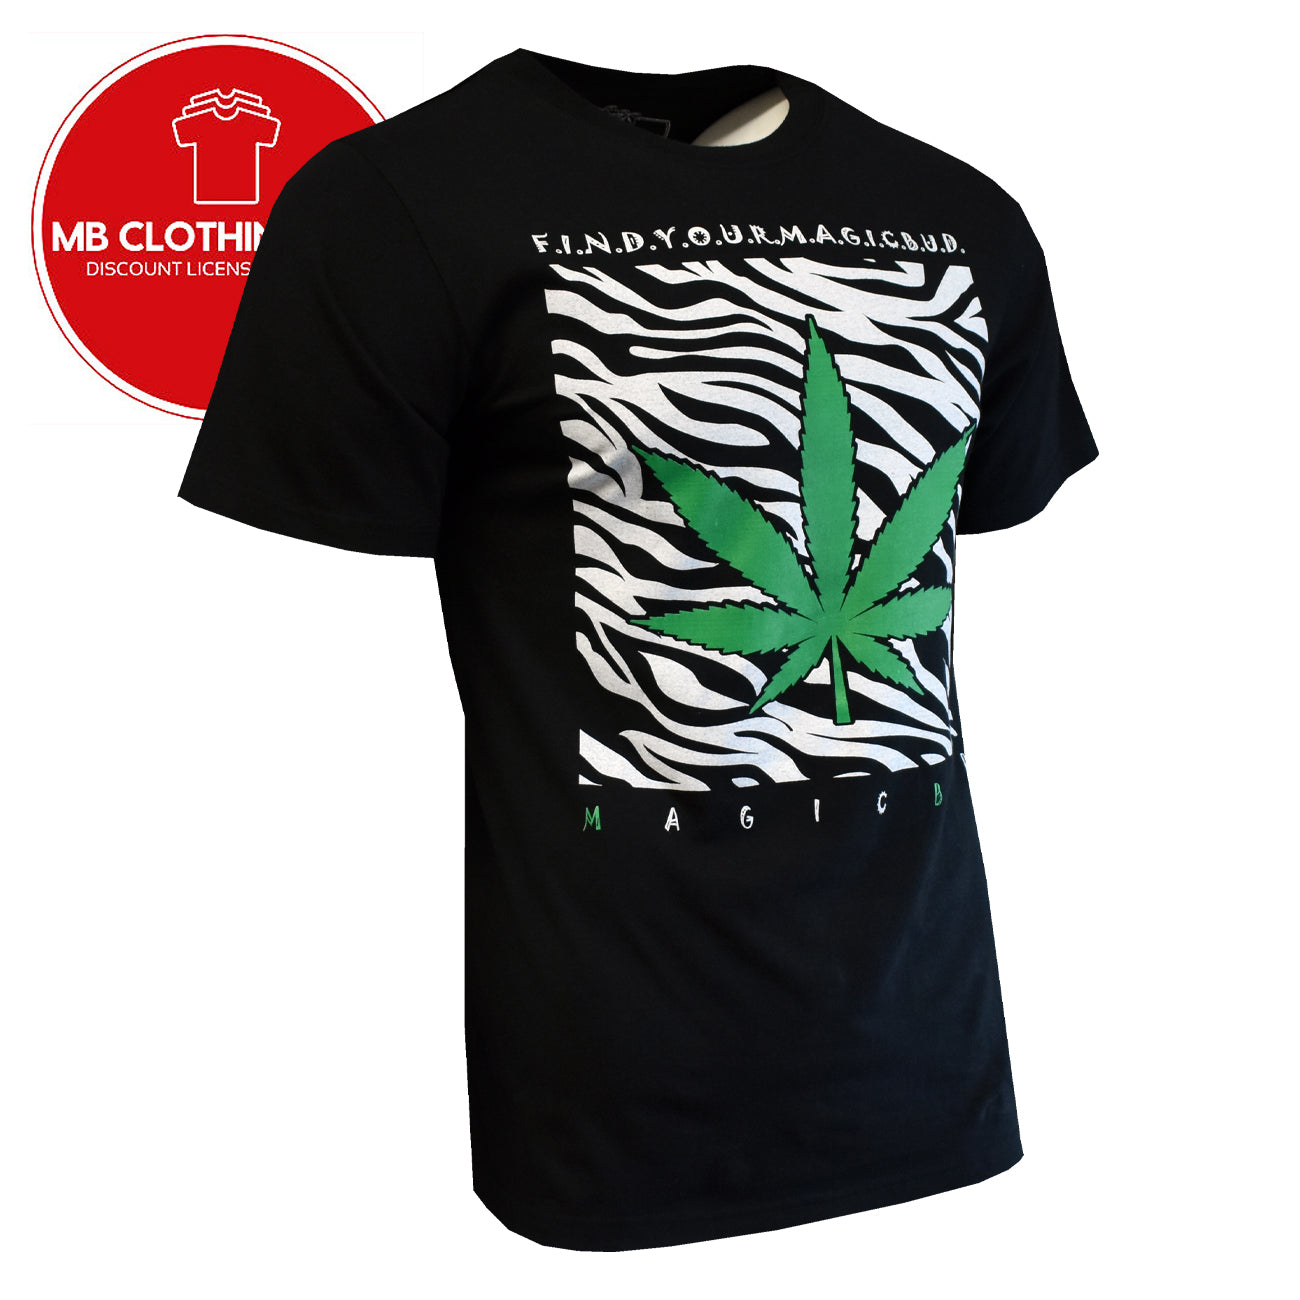 Men's T shirts Find Your Magic Bud Original MB T-Shirts 100% Cotton WEED